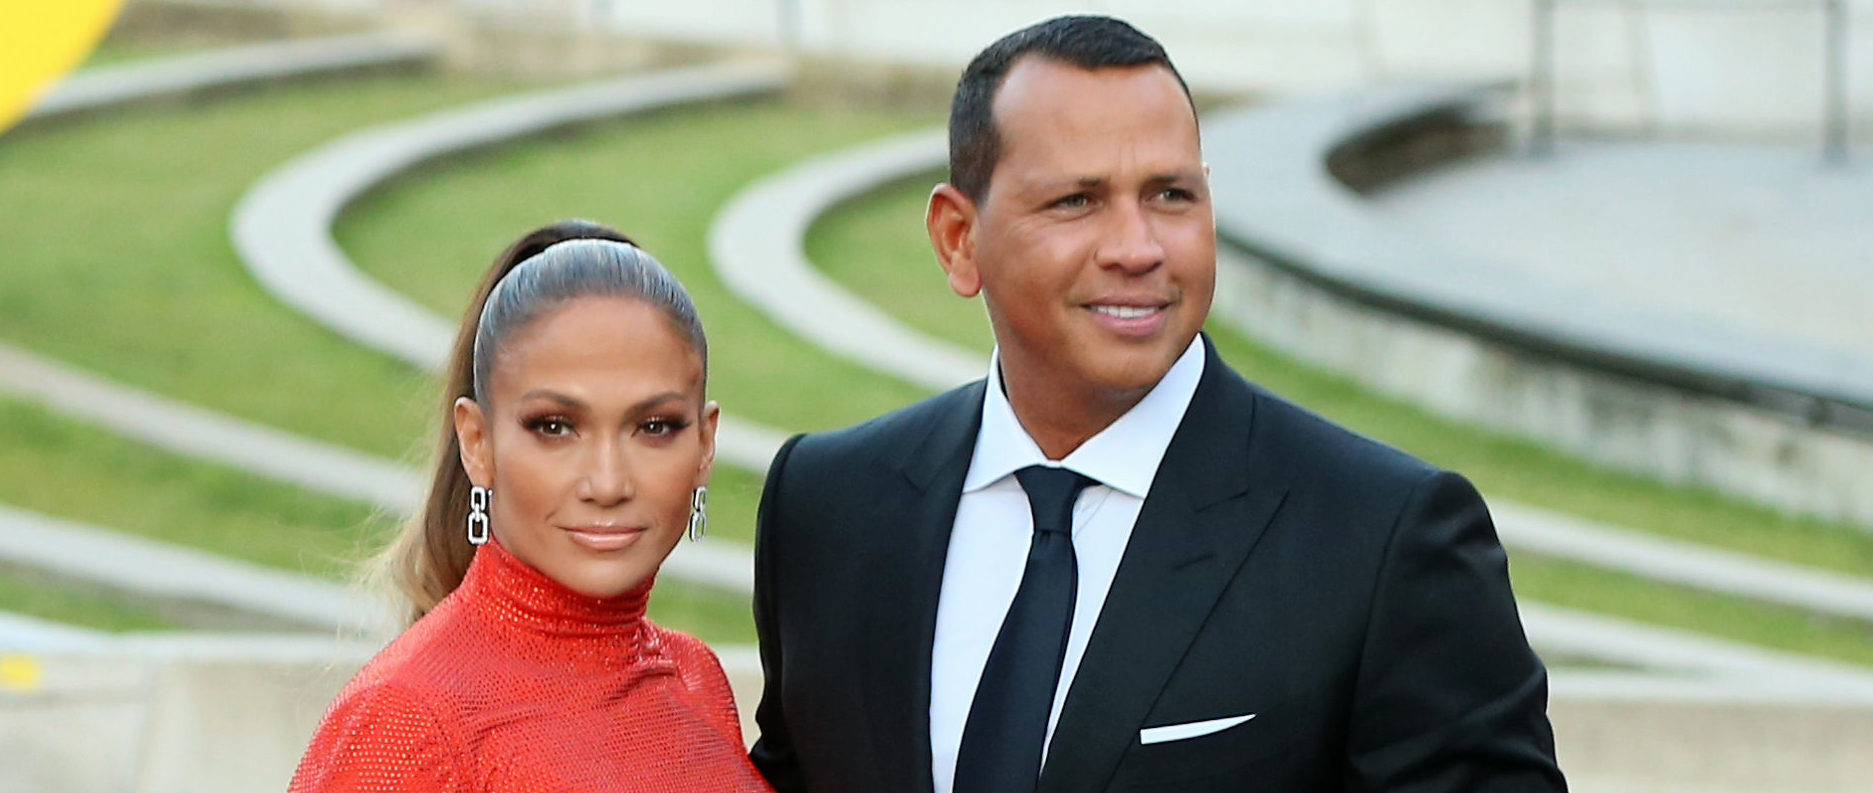 TikTok user posts video about J.Lo and Alex Rodriguez